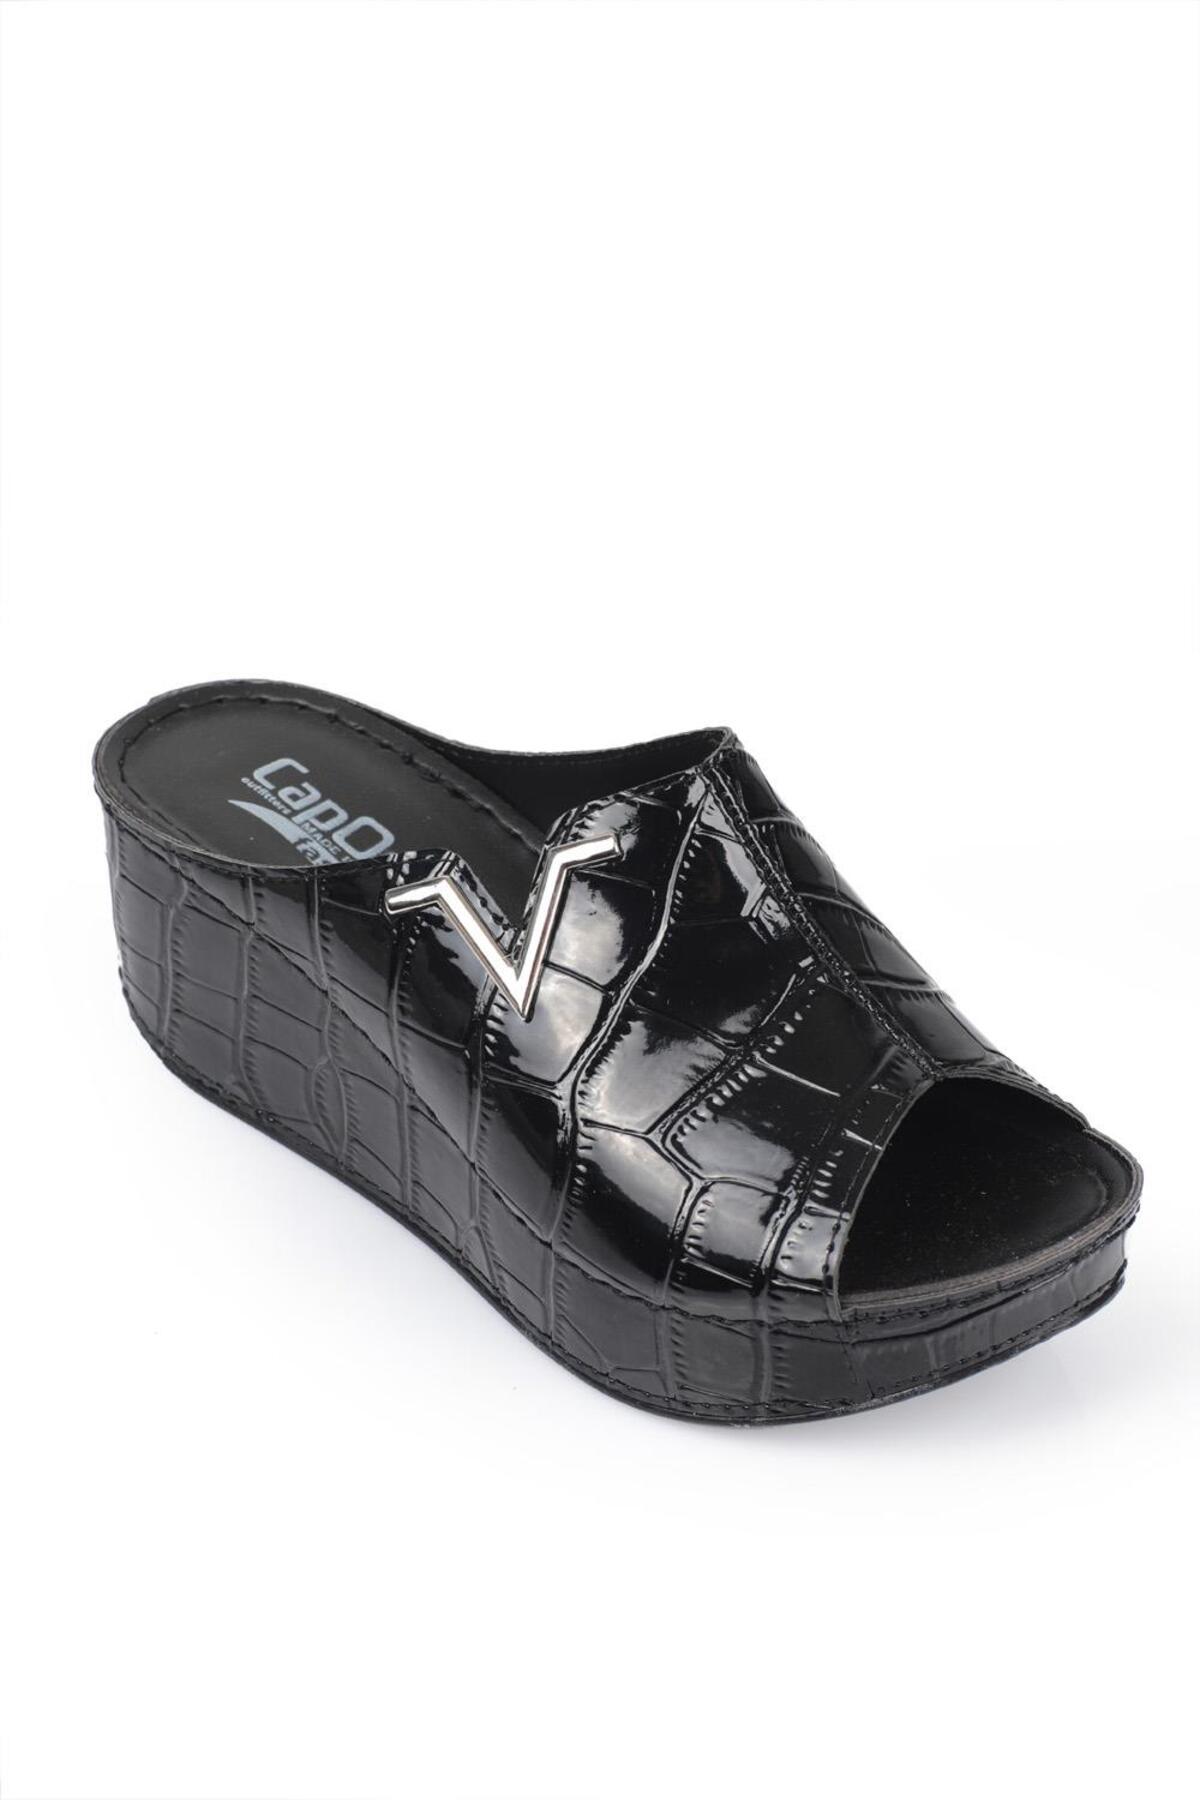 Levně Capone Outfitters Capone 6145 Womens Black Platform V Buckle Slippers